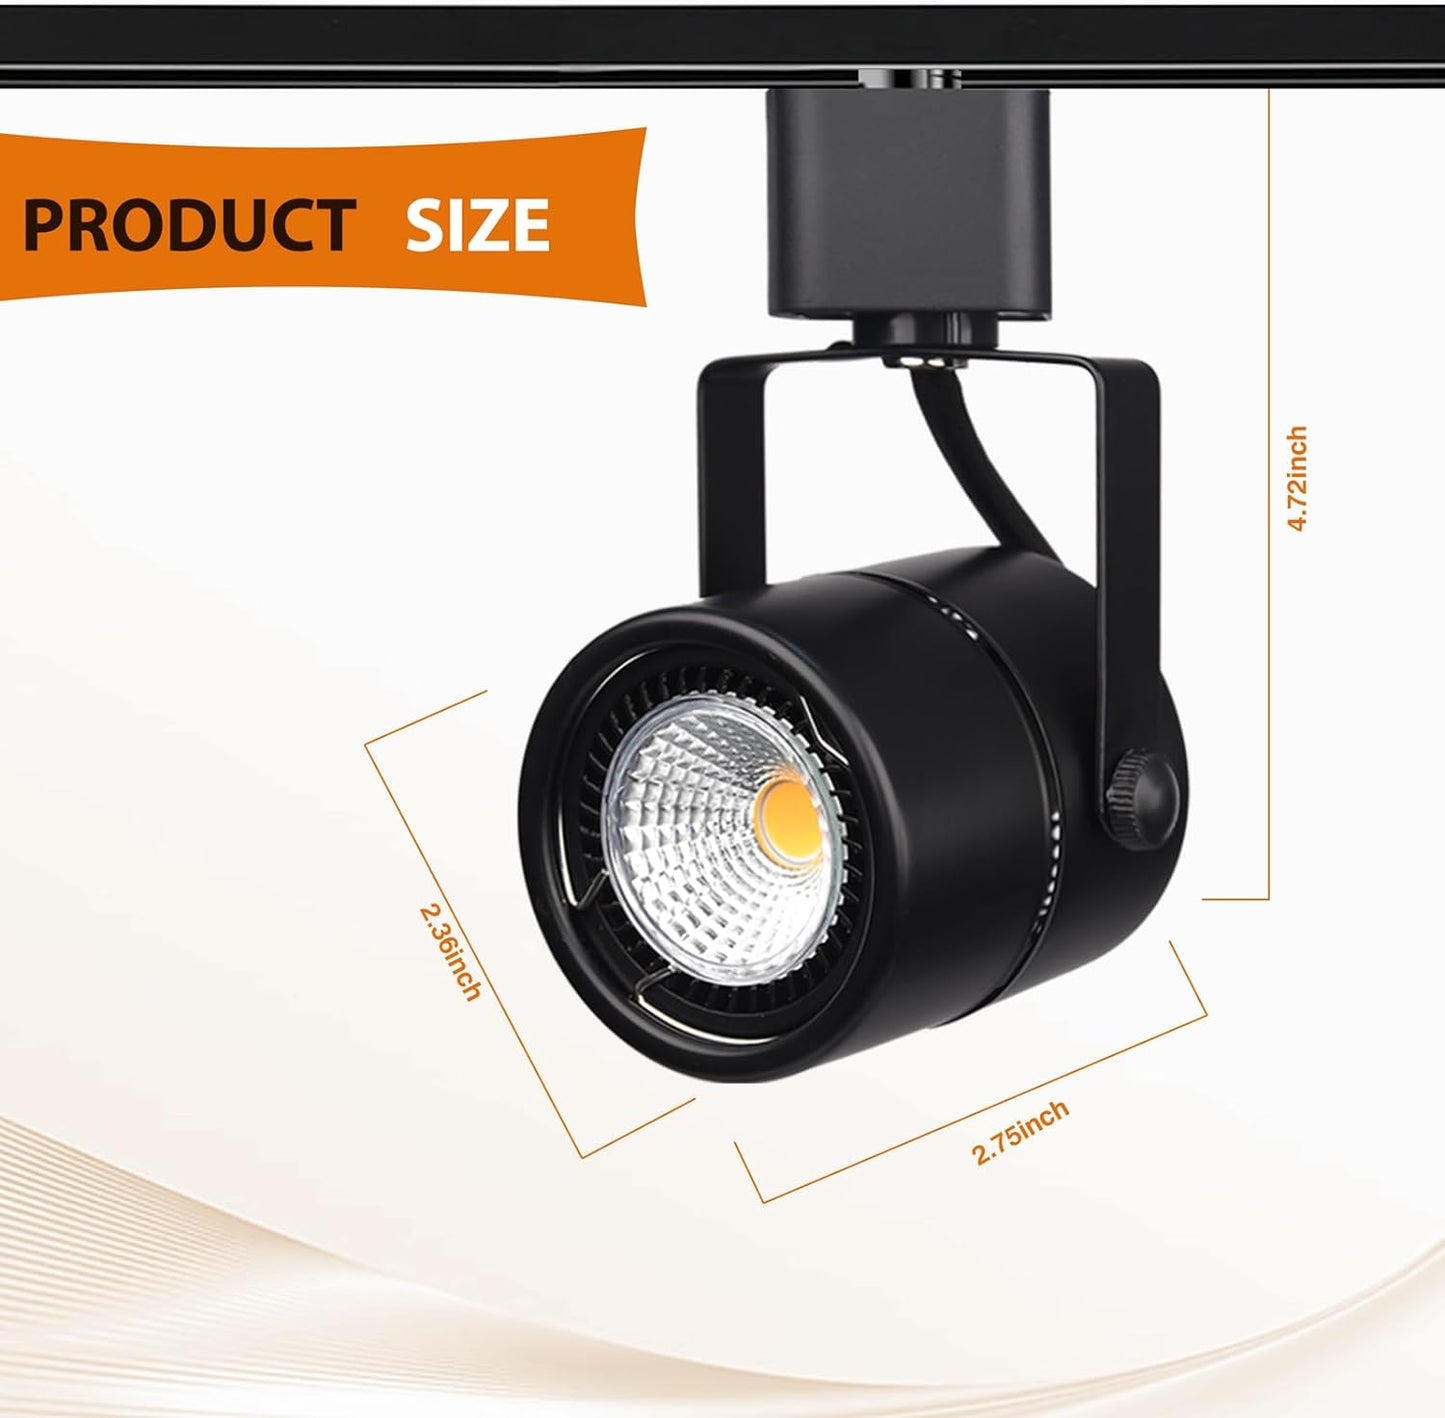 7.5W LED, H Type Track Lighting Heads, Dimmable Bright 5500K Cool White, Flicker Free 24 count